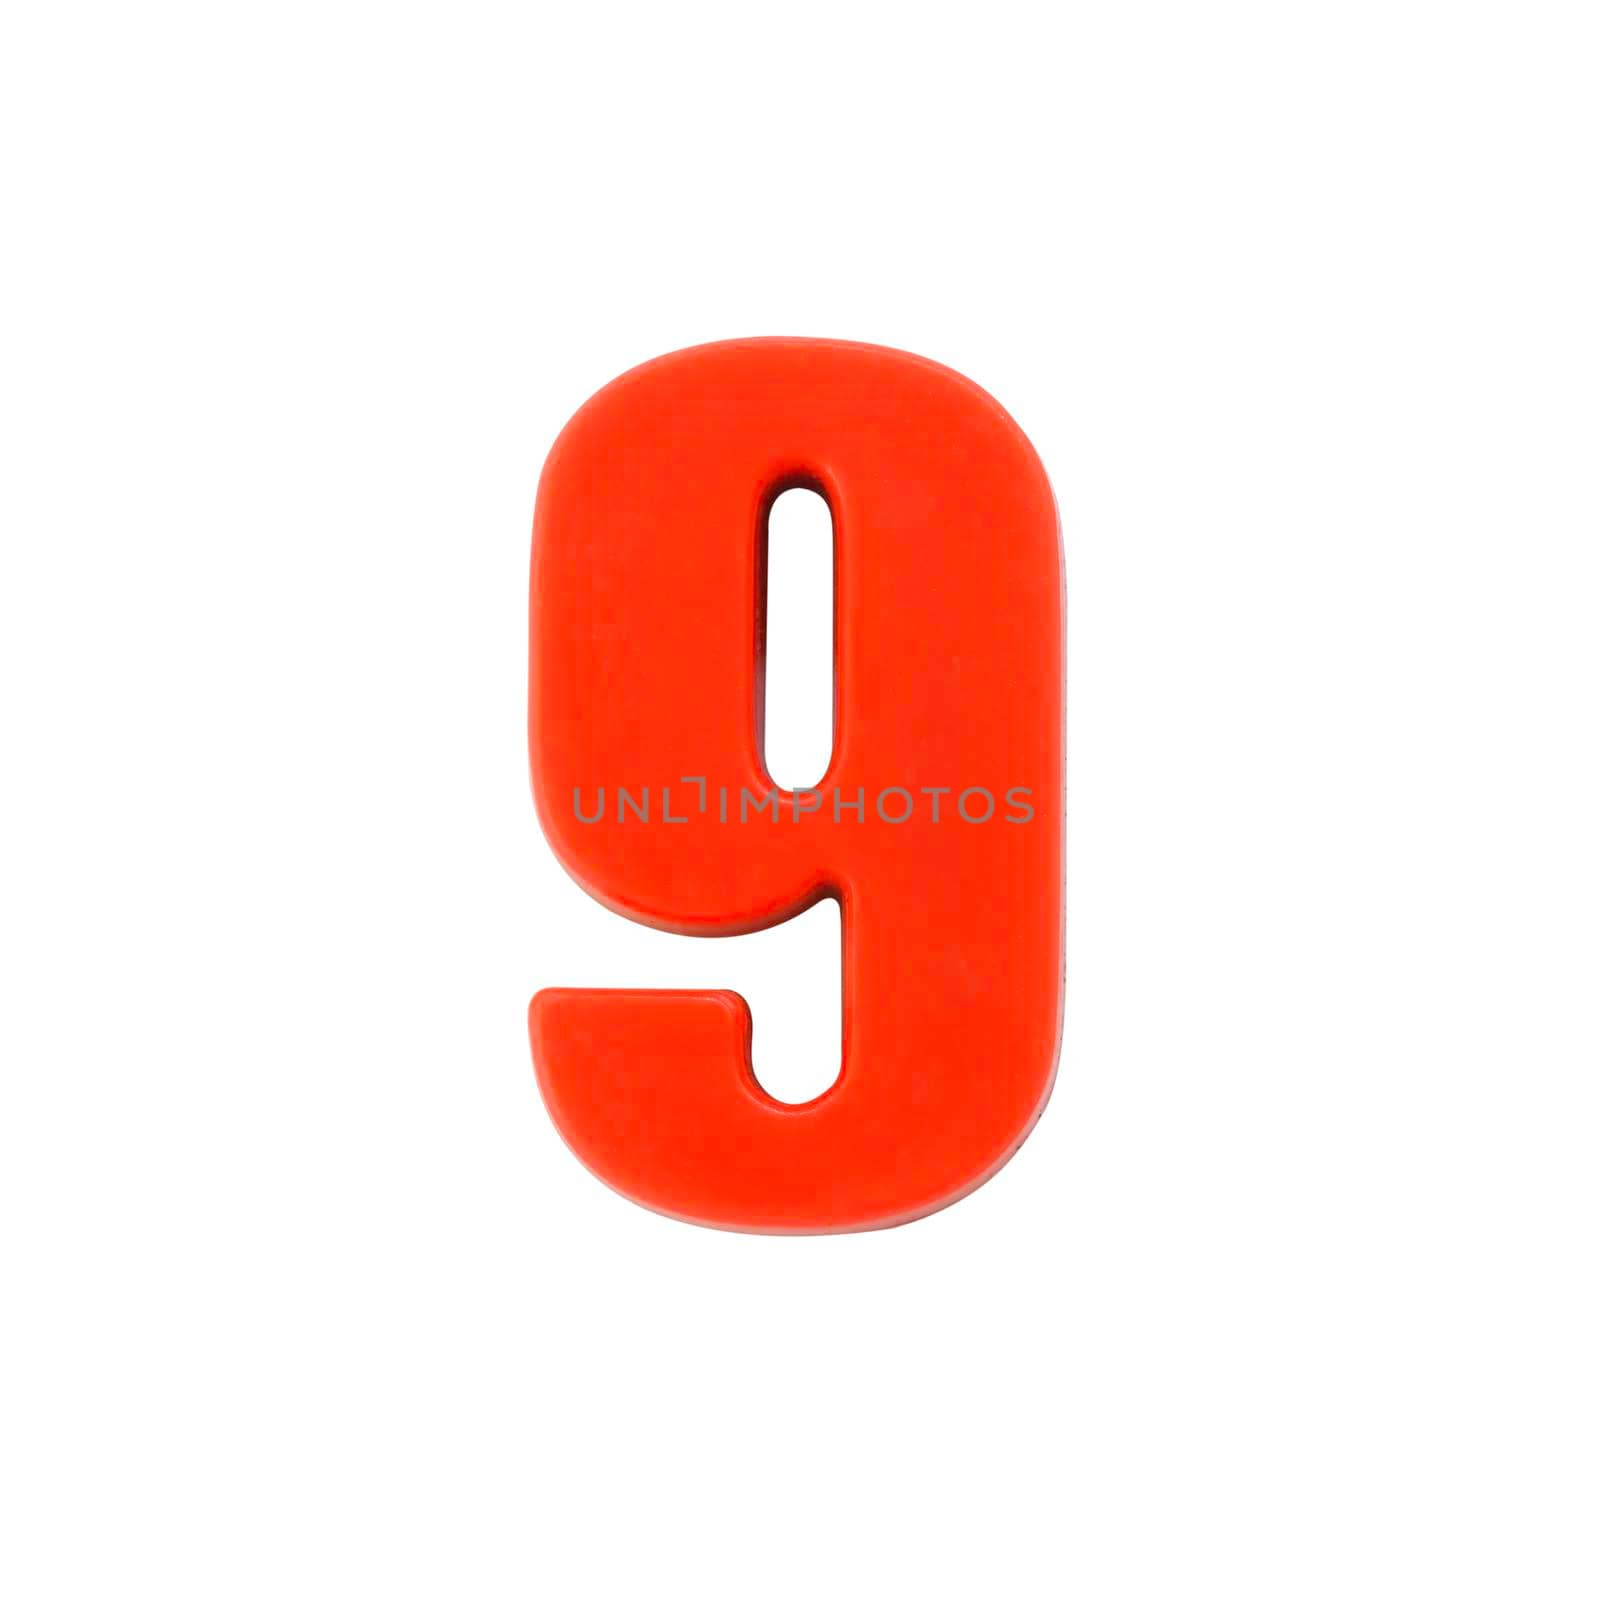 Shot of a number nine made of red plastic with clipping path